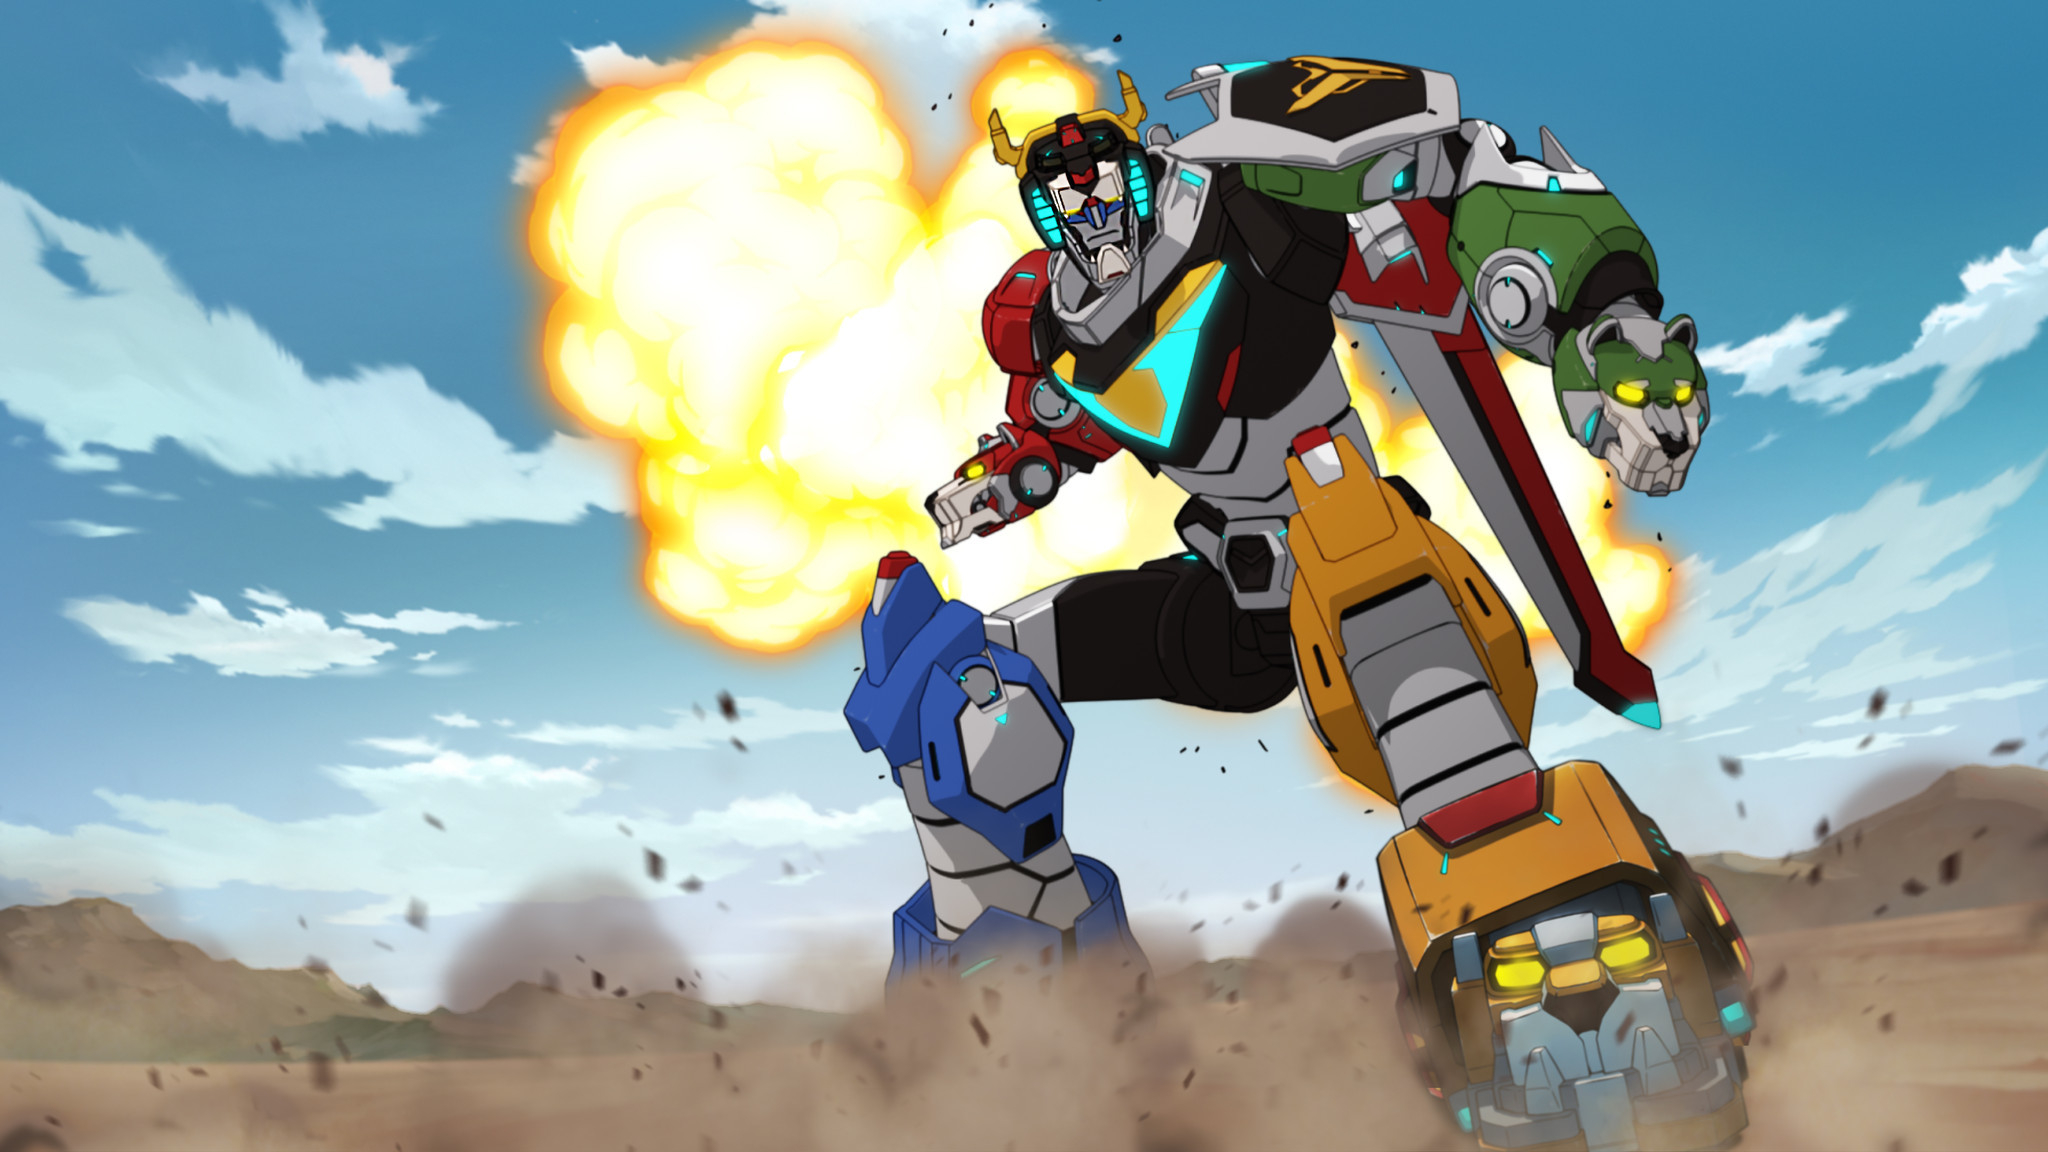 2048x1152 Images from 'Voltron: Legendary Defender